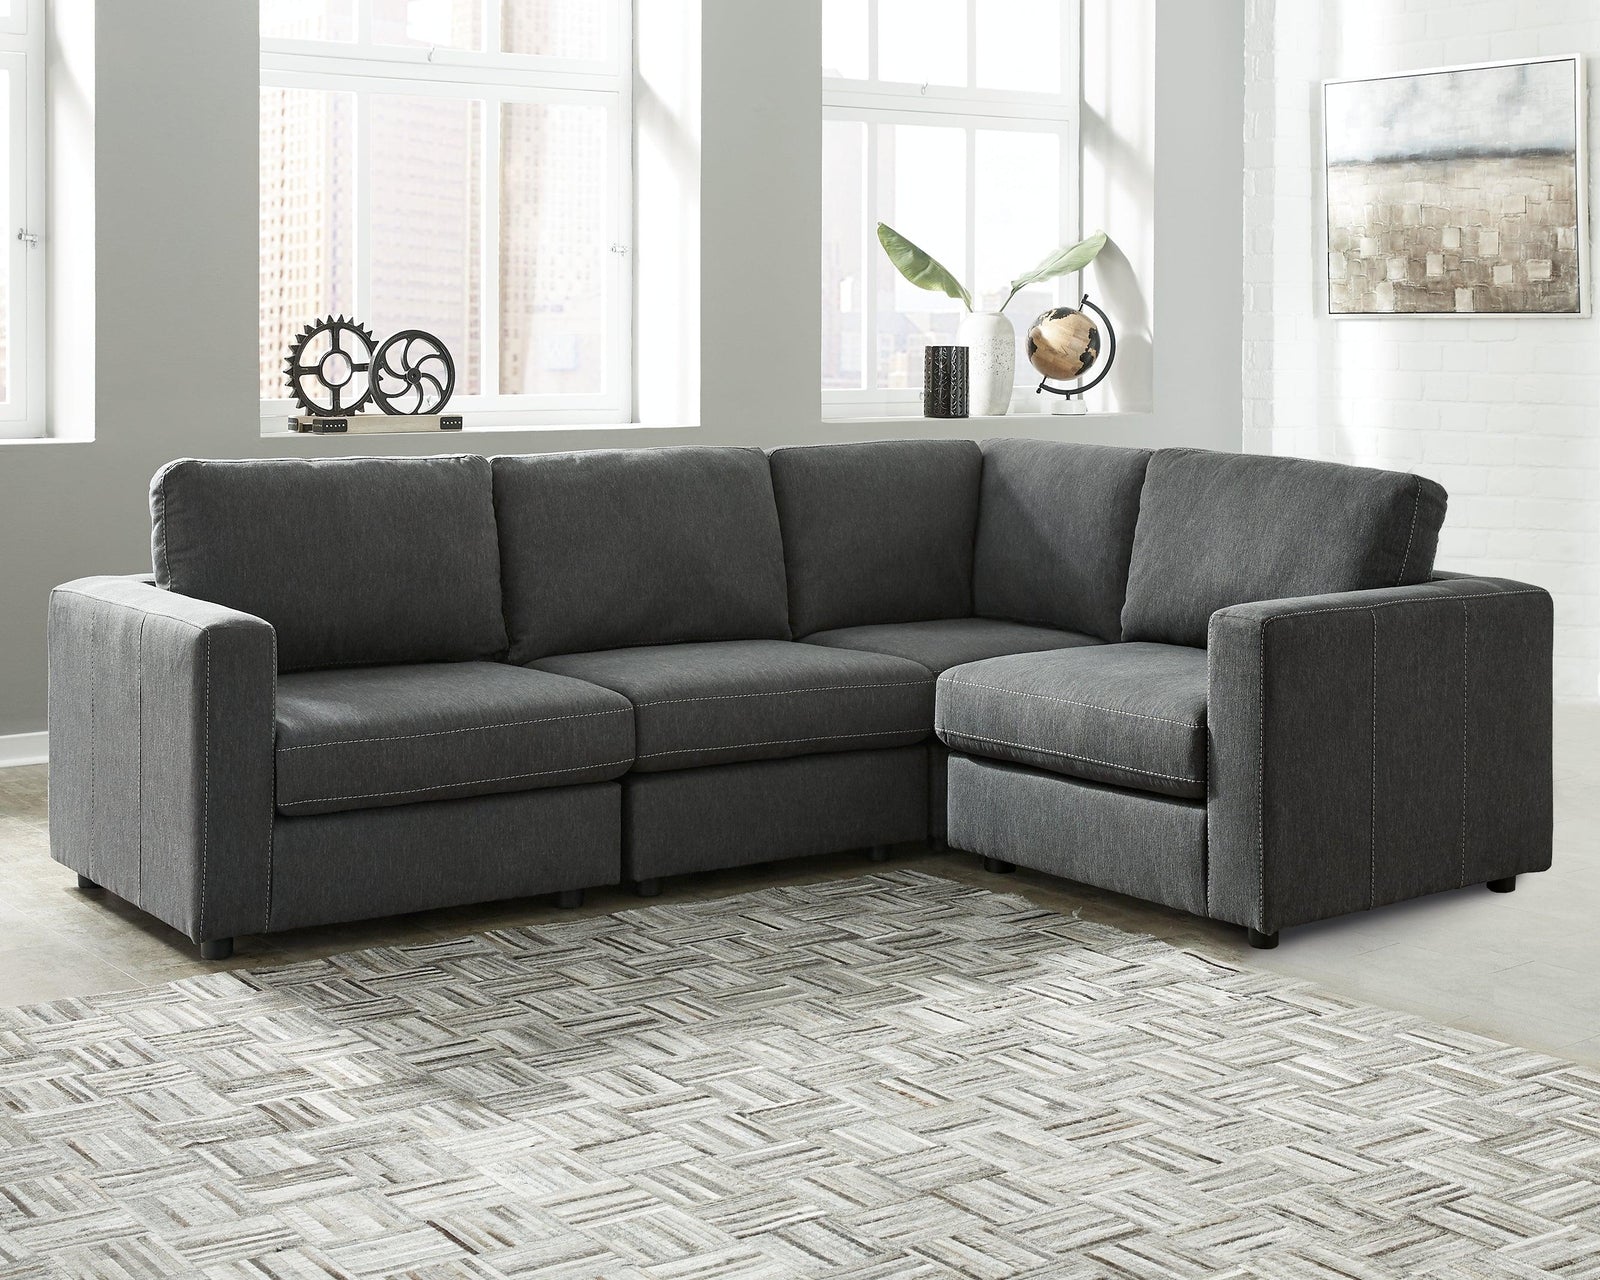 Candela Charcoal Microfiber 4-Piece Sectional